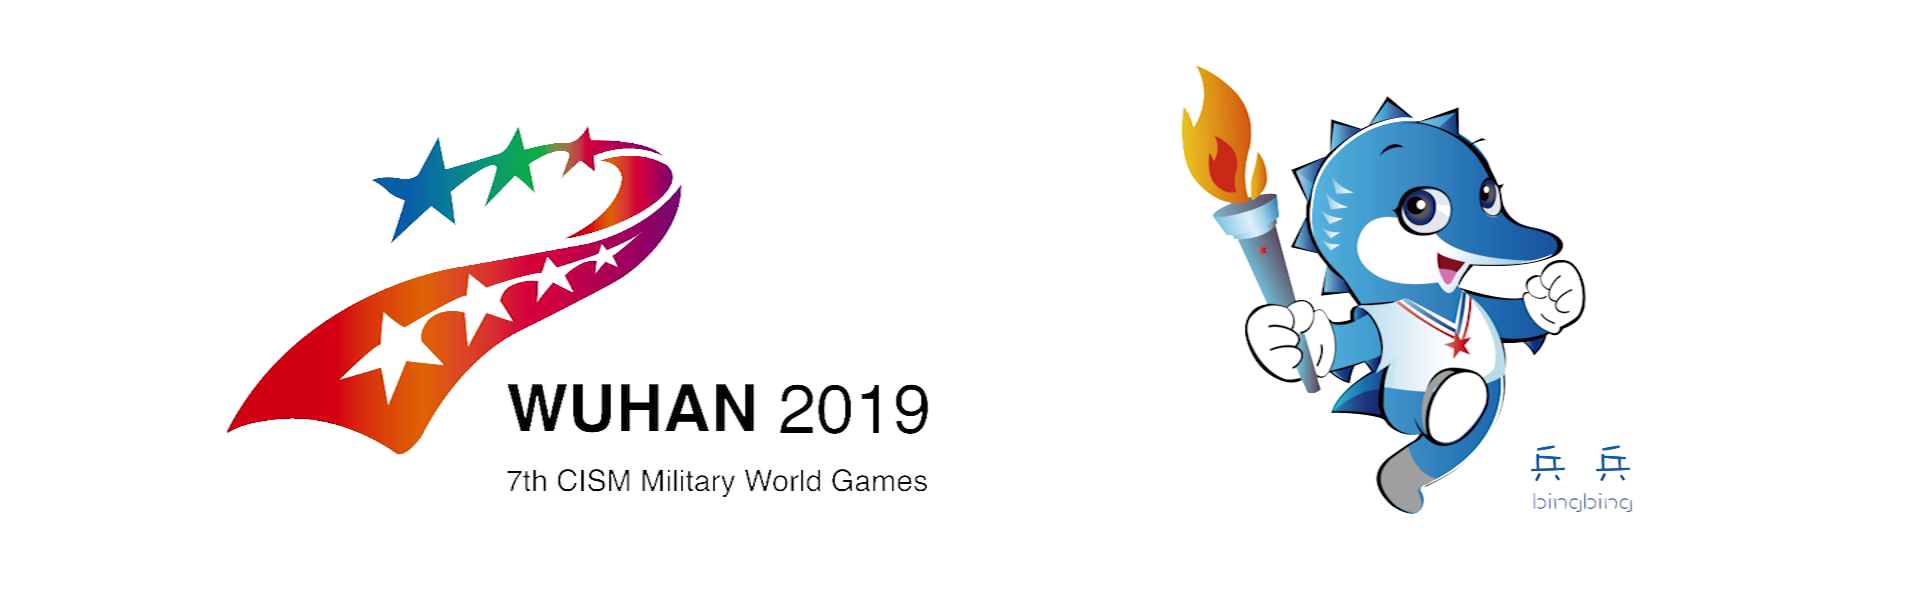 7th Military World Games Wuhan 2019